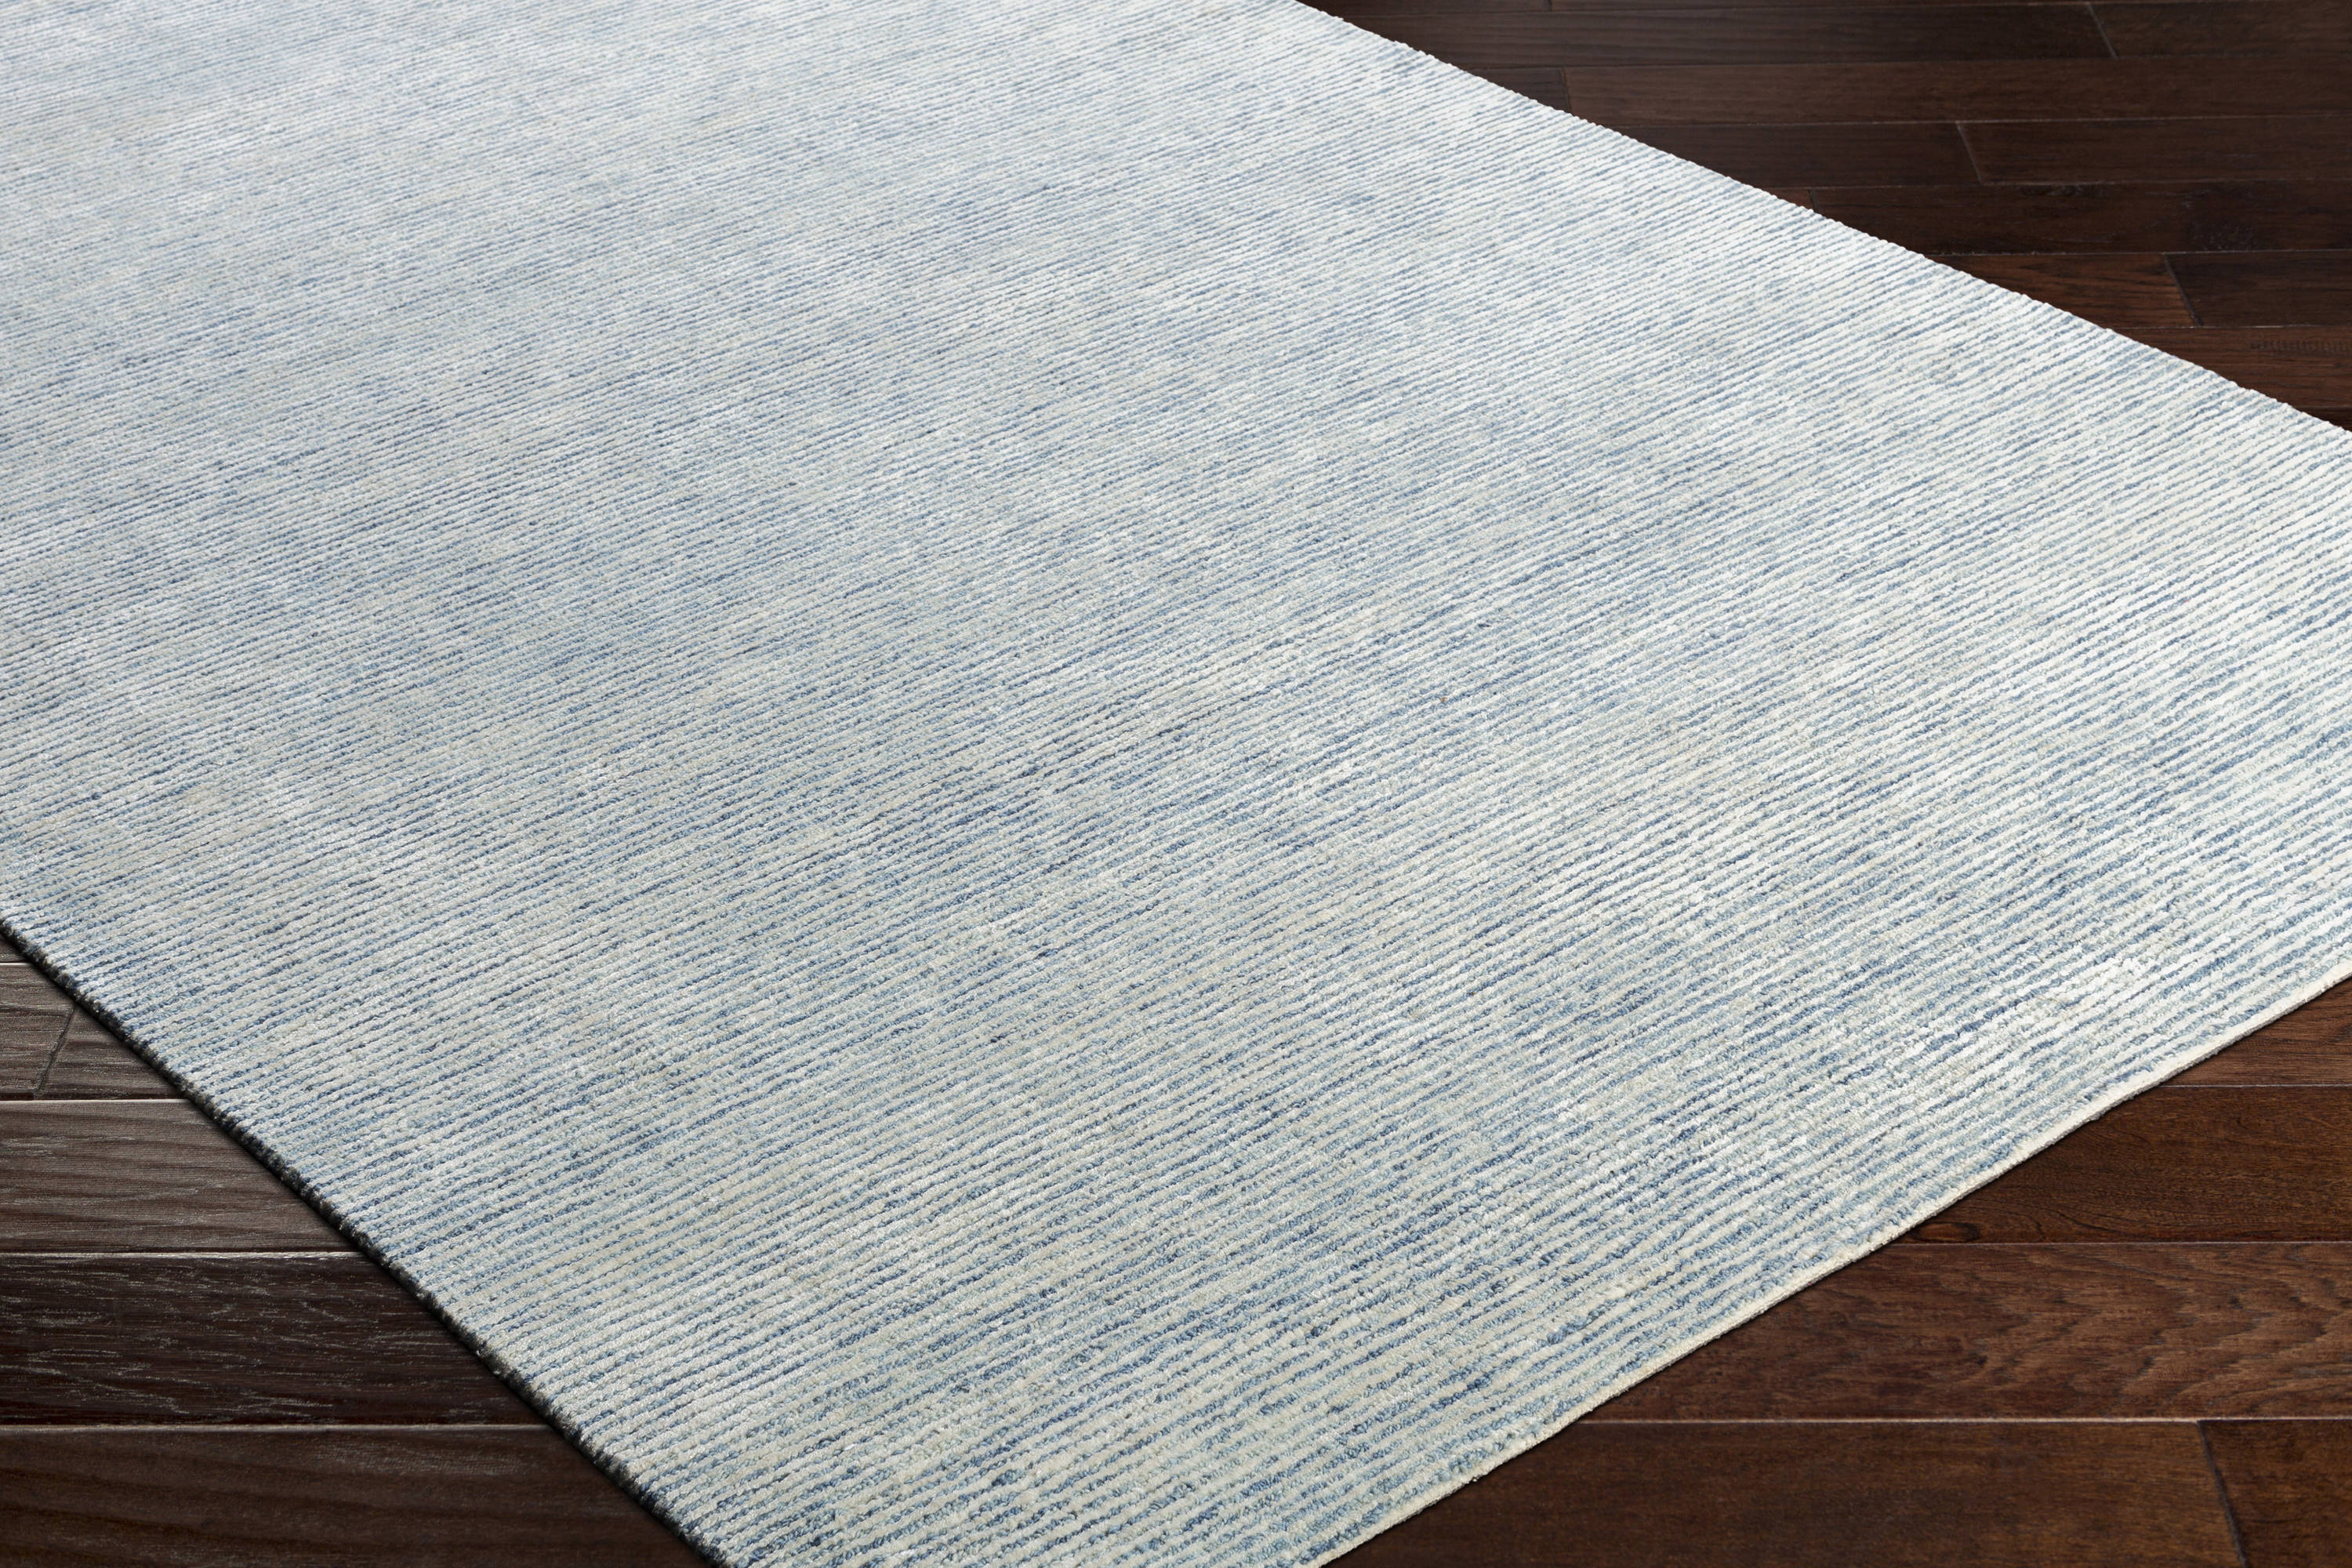 Surya Strada 8 X 10 Wool Pale Blue Indoor Solid Area Rug at Lowes.com